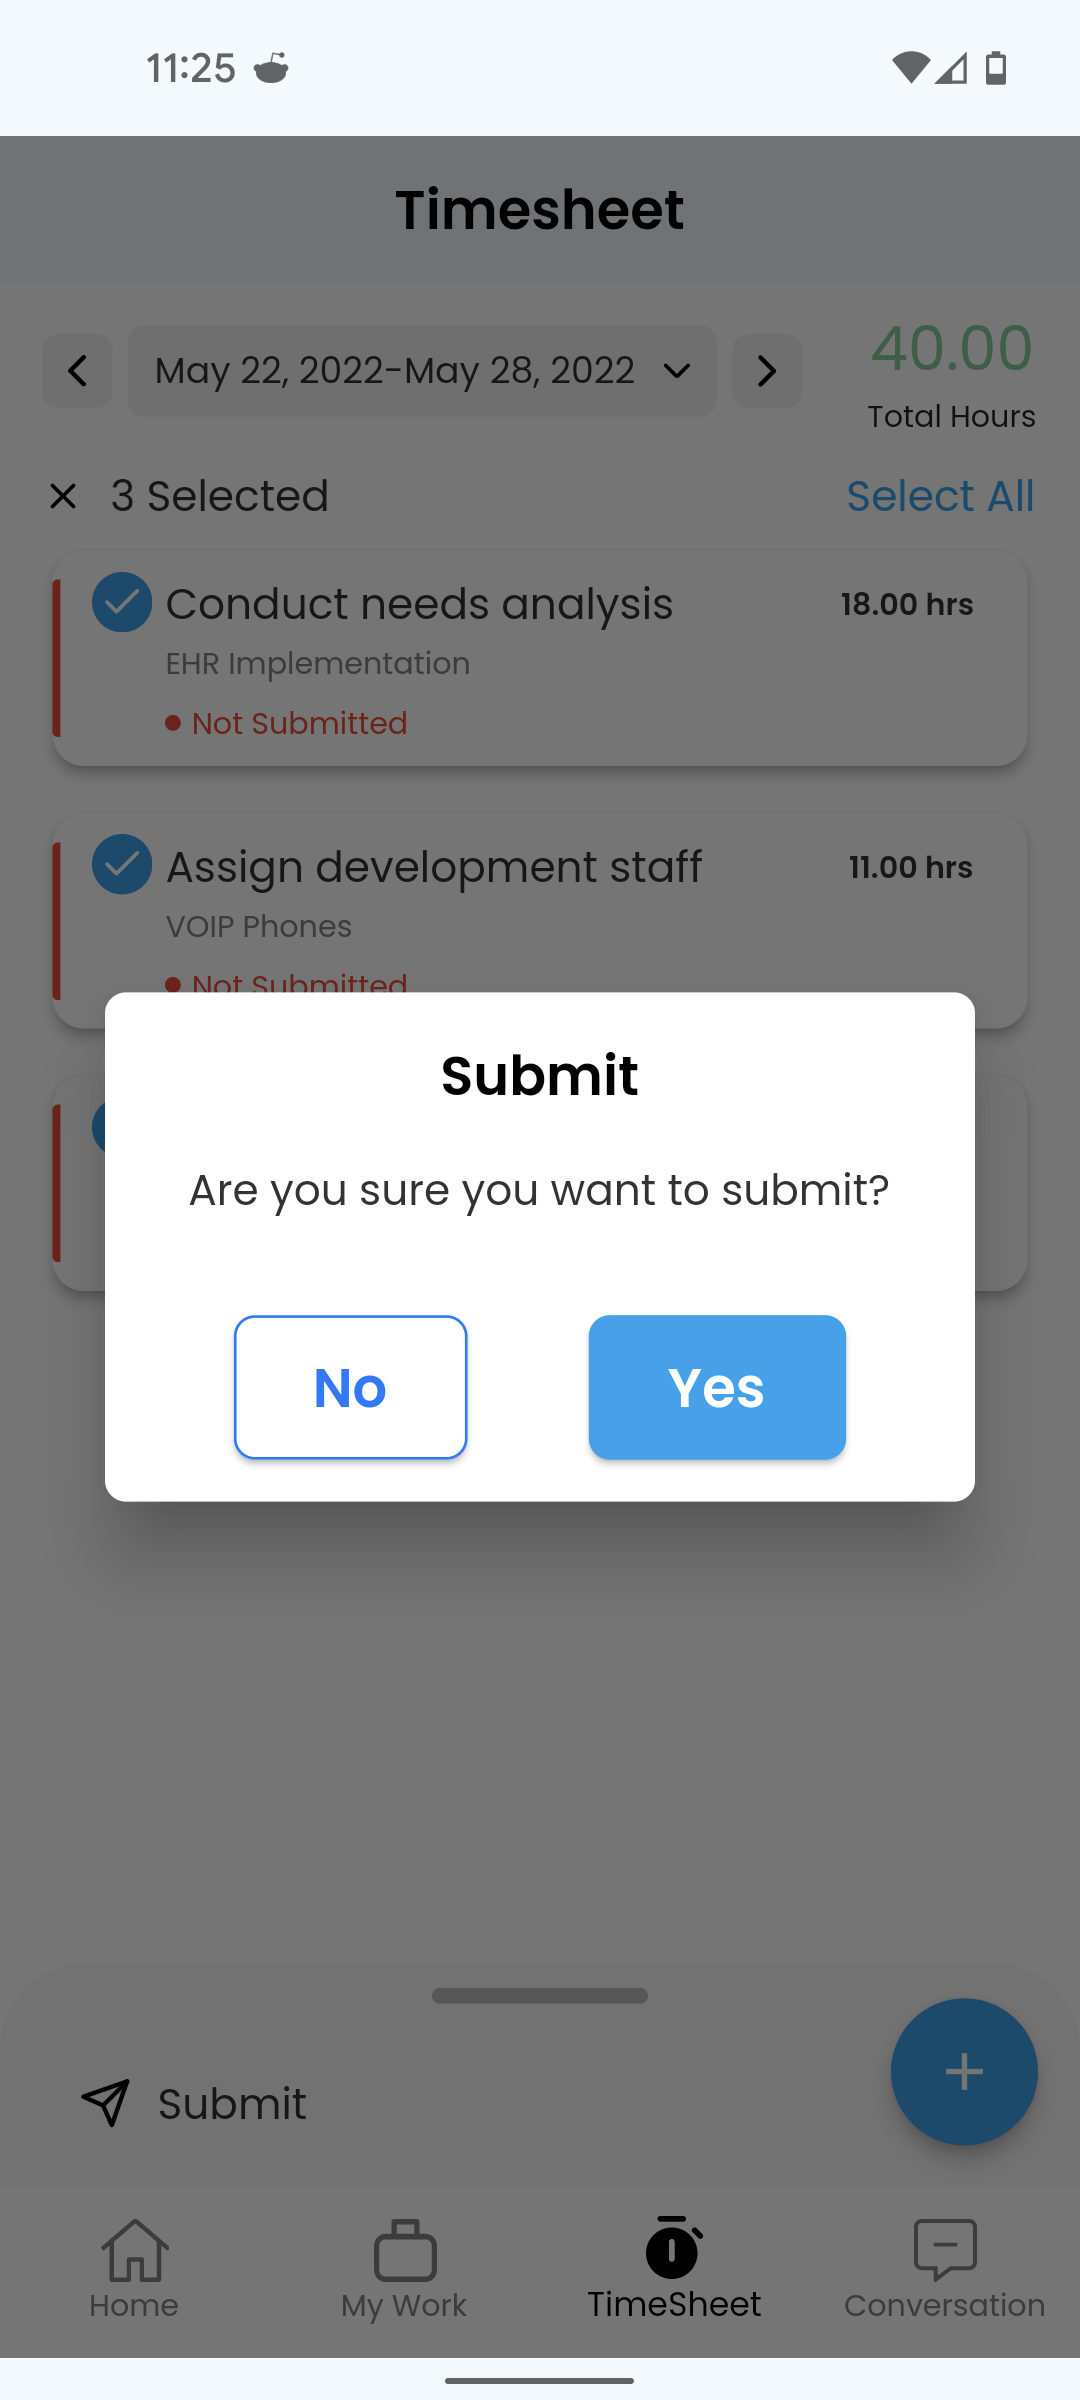 App_Timesheet_SubmitTimeConfirm.png